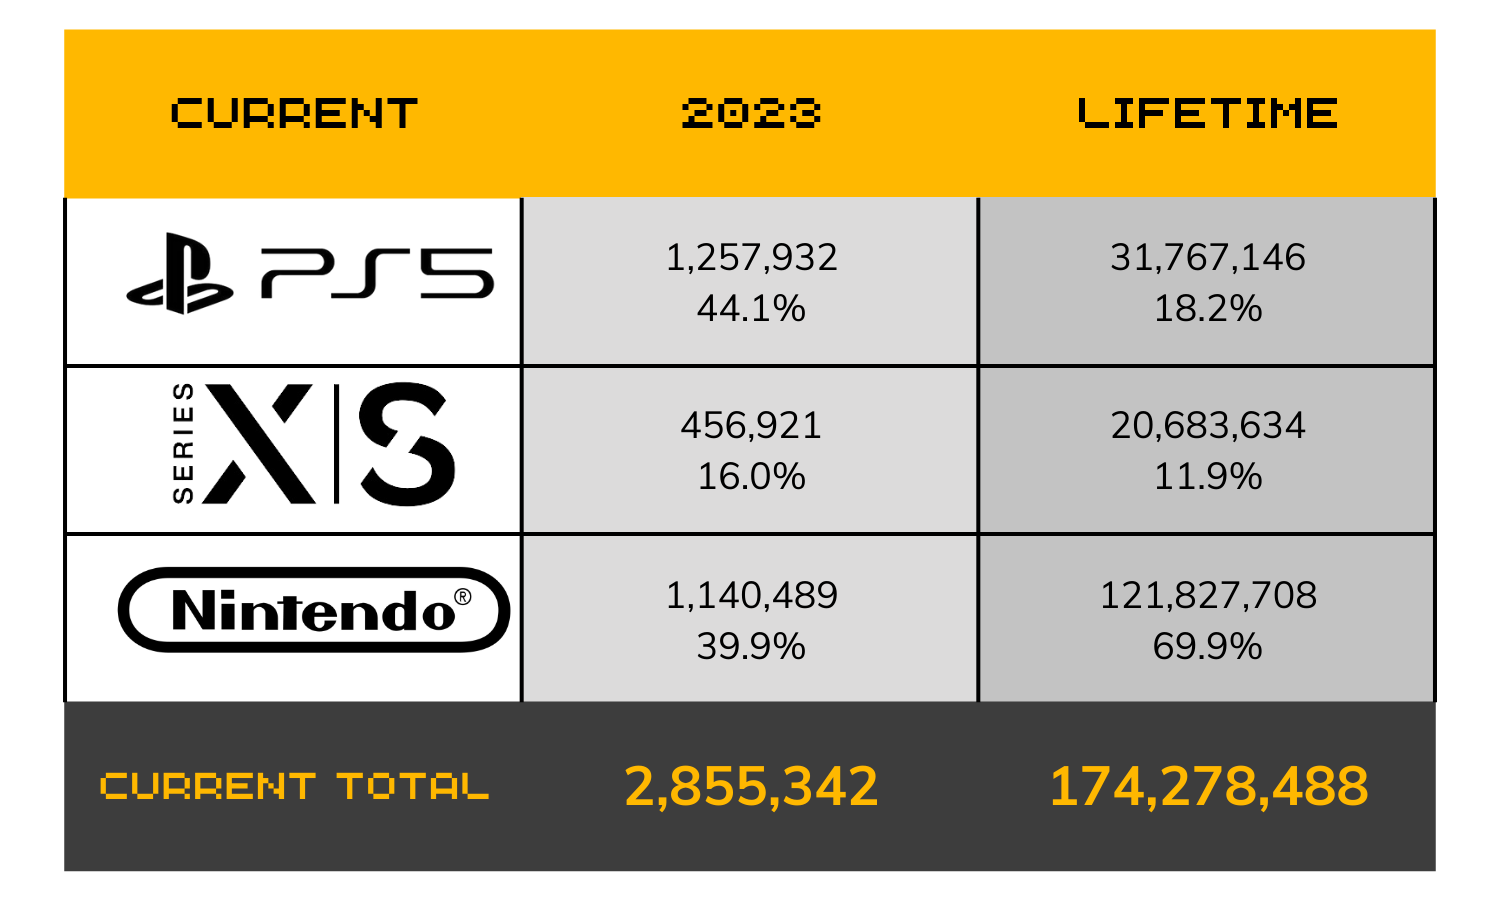 Comparison table for PS5, XS, and Nintendo